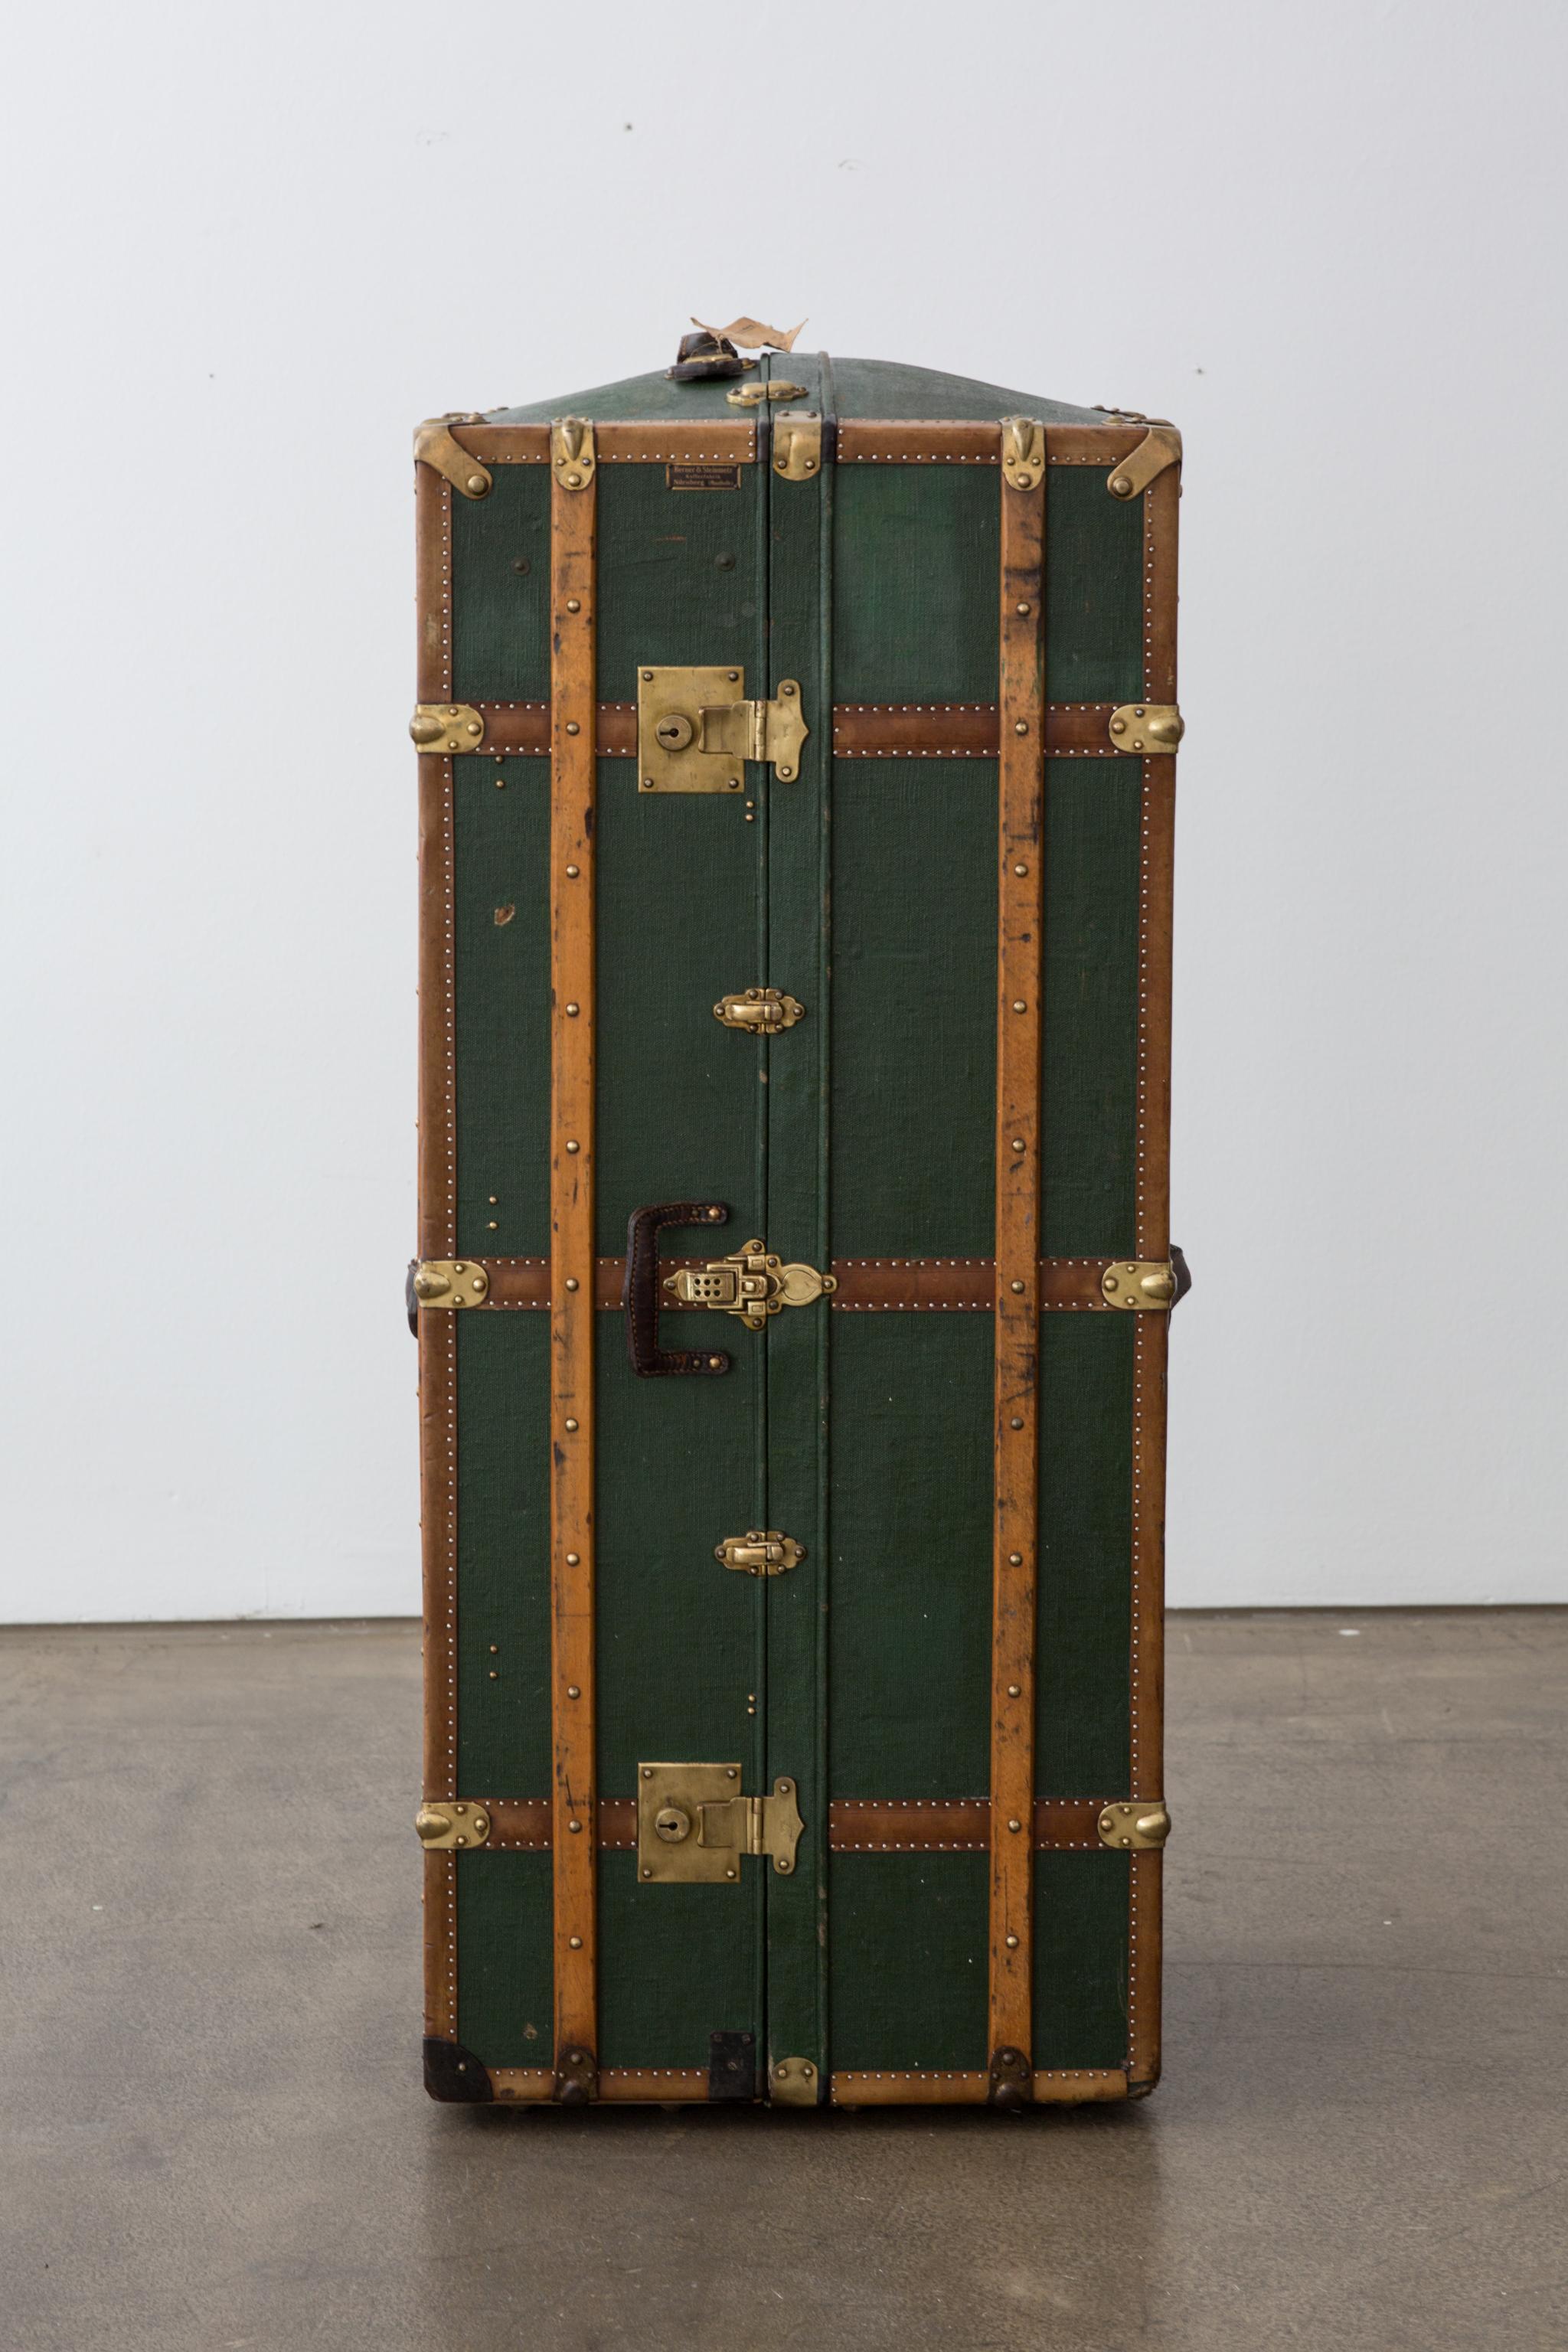 A very elegant and hard to find early 20th century (about 1920) wardrobe steamer trunk in wonderful green canvas. The inside is lined with purple fabric, which along with the green canvas and the brown leather makes for an intriguing combination.
On